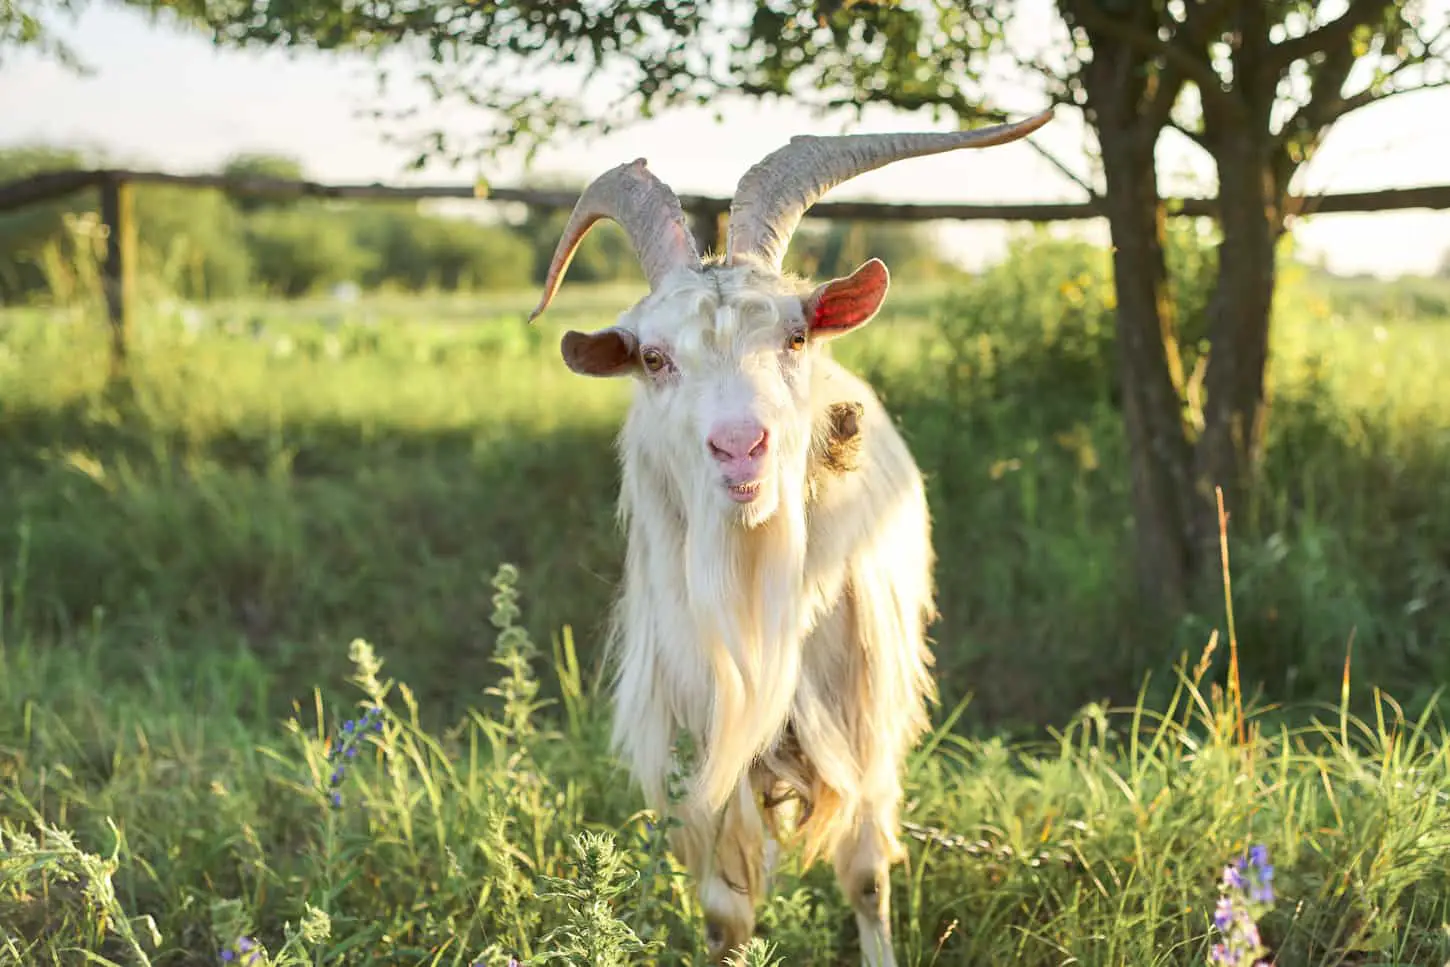 An image of an old horned bearded white goat in a farm looking at the camera.